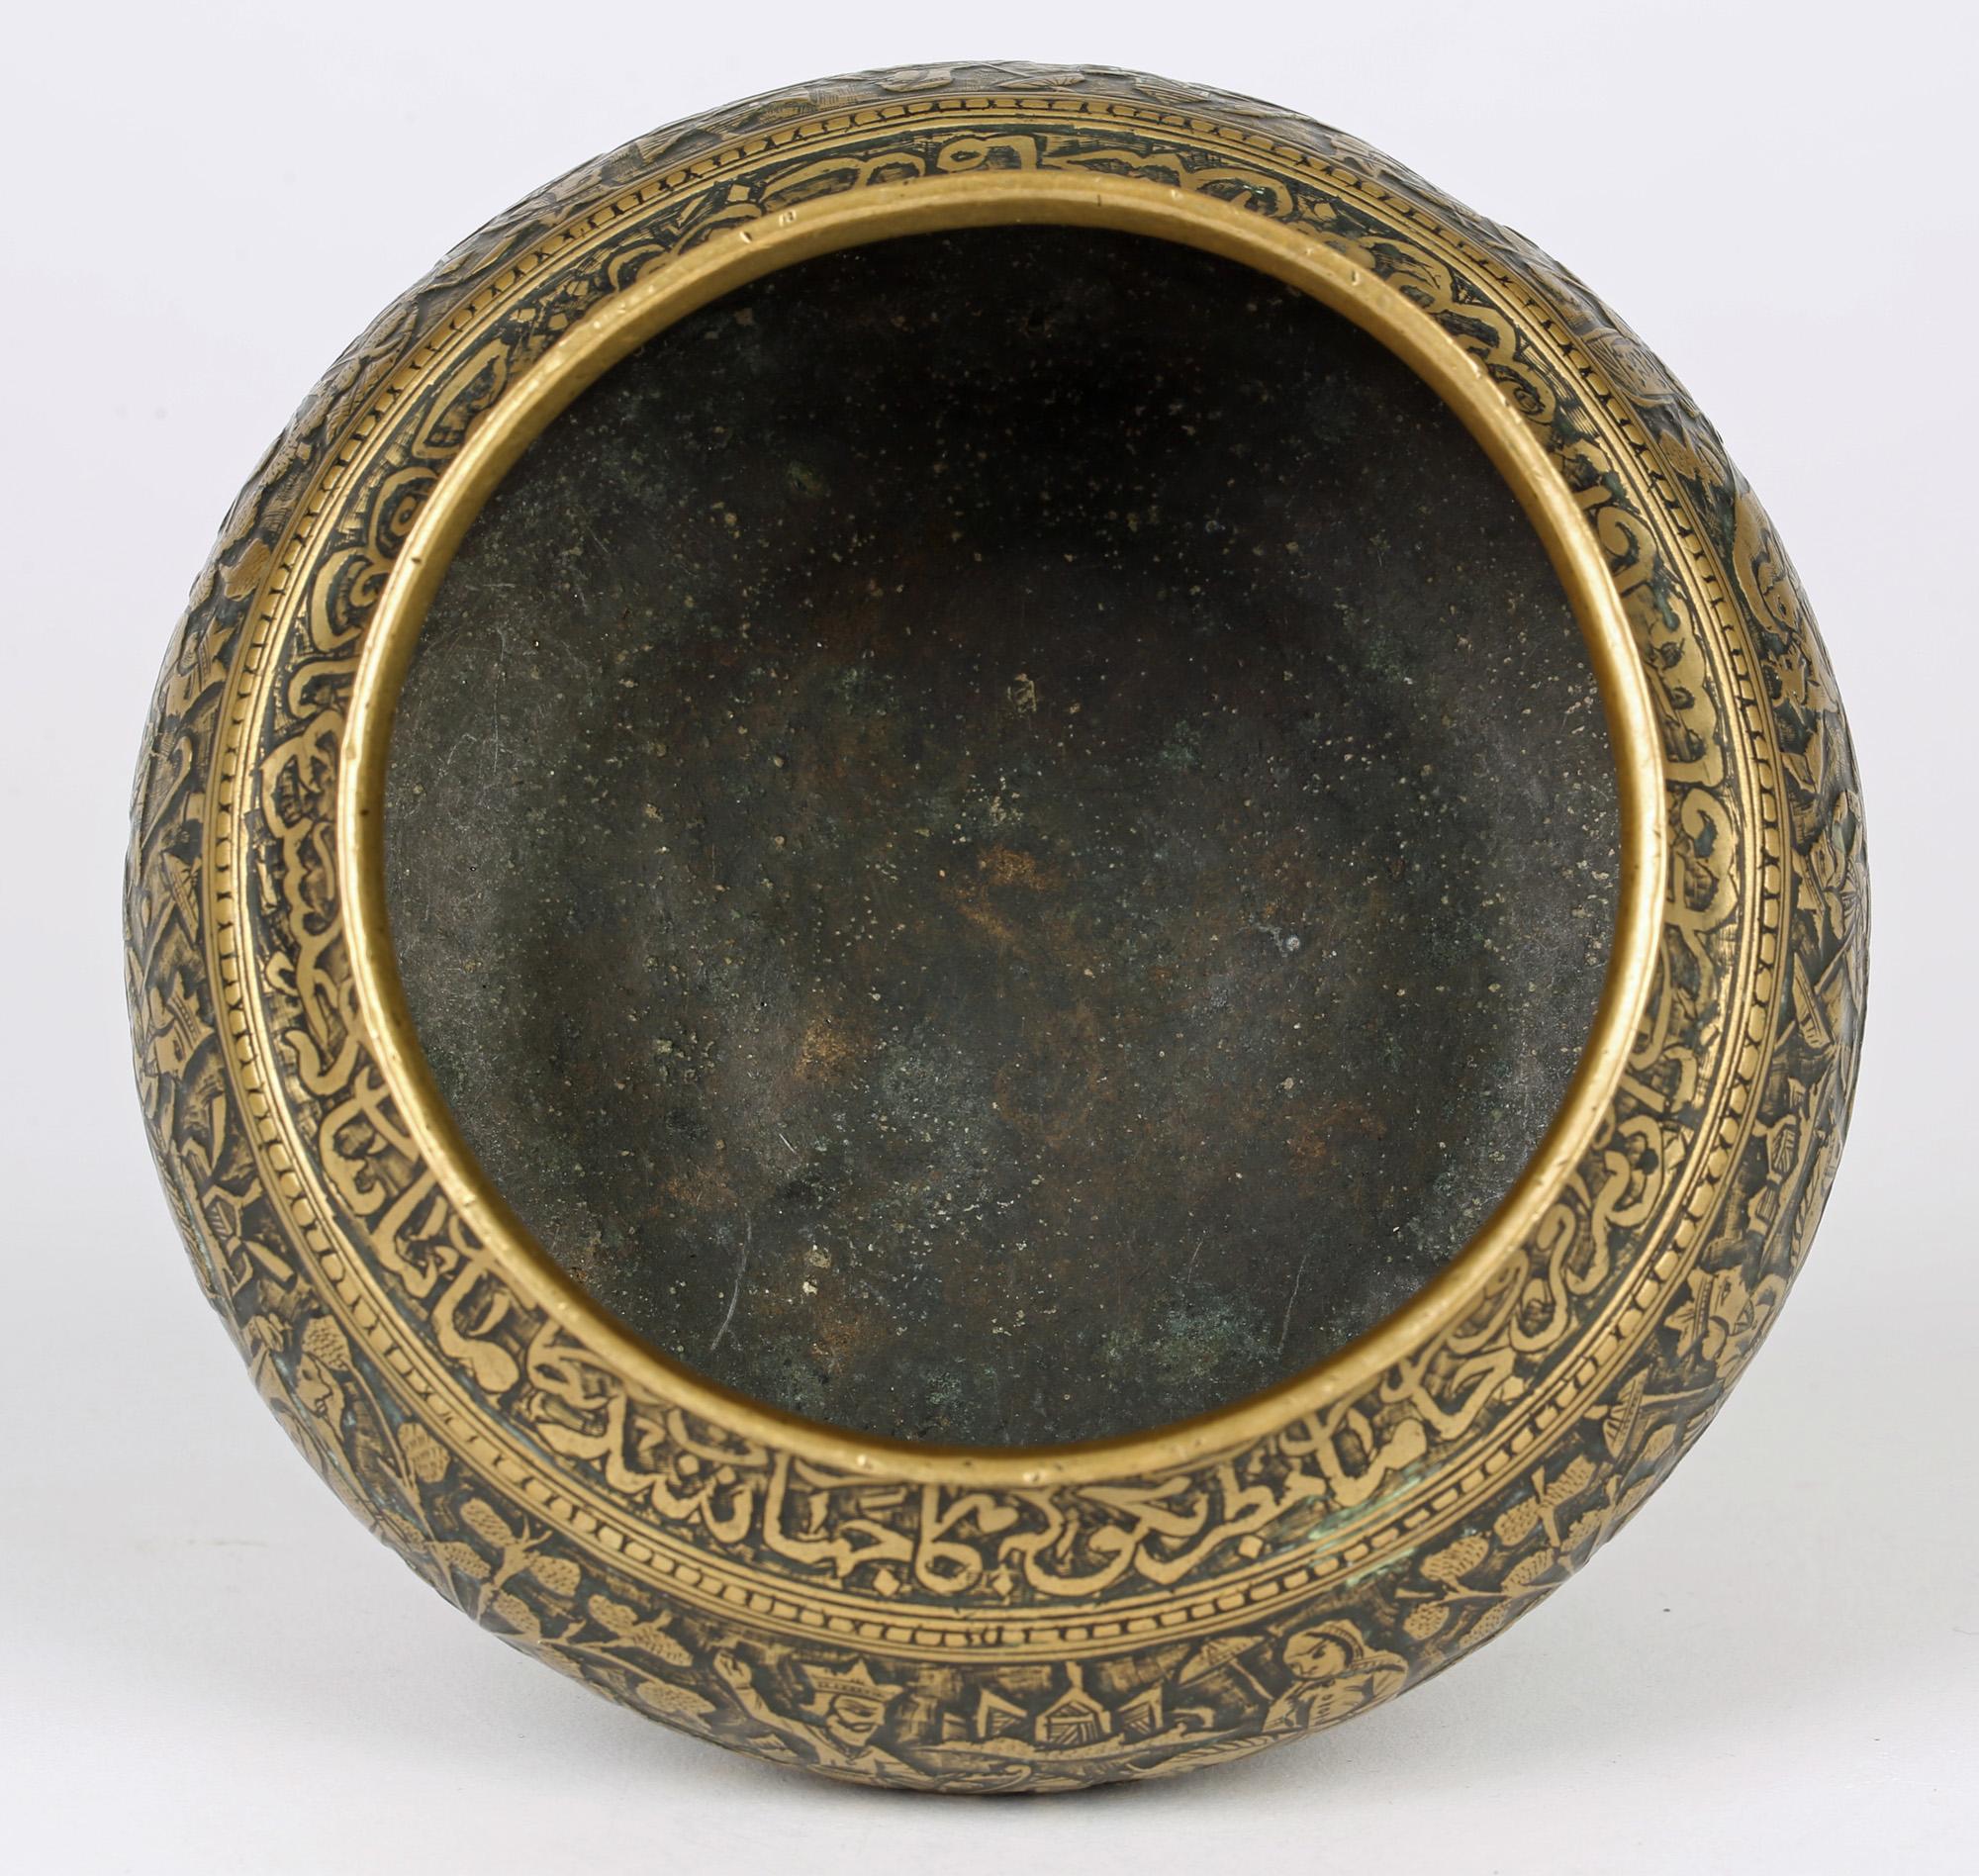 An exceptional hand crafted antique Moorish revival brass bowl engraved in relief with a continuous figural scene, probably a wedding dating from the 19th century. This Middle Eastern rounded bowl is heavily made with a very finely detailed scene